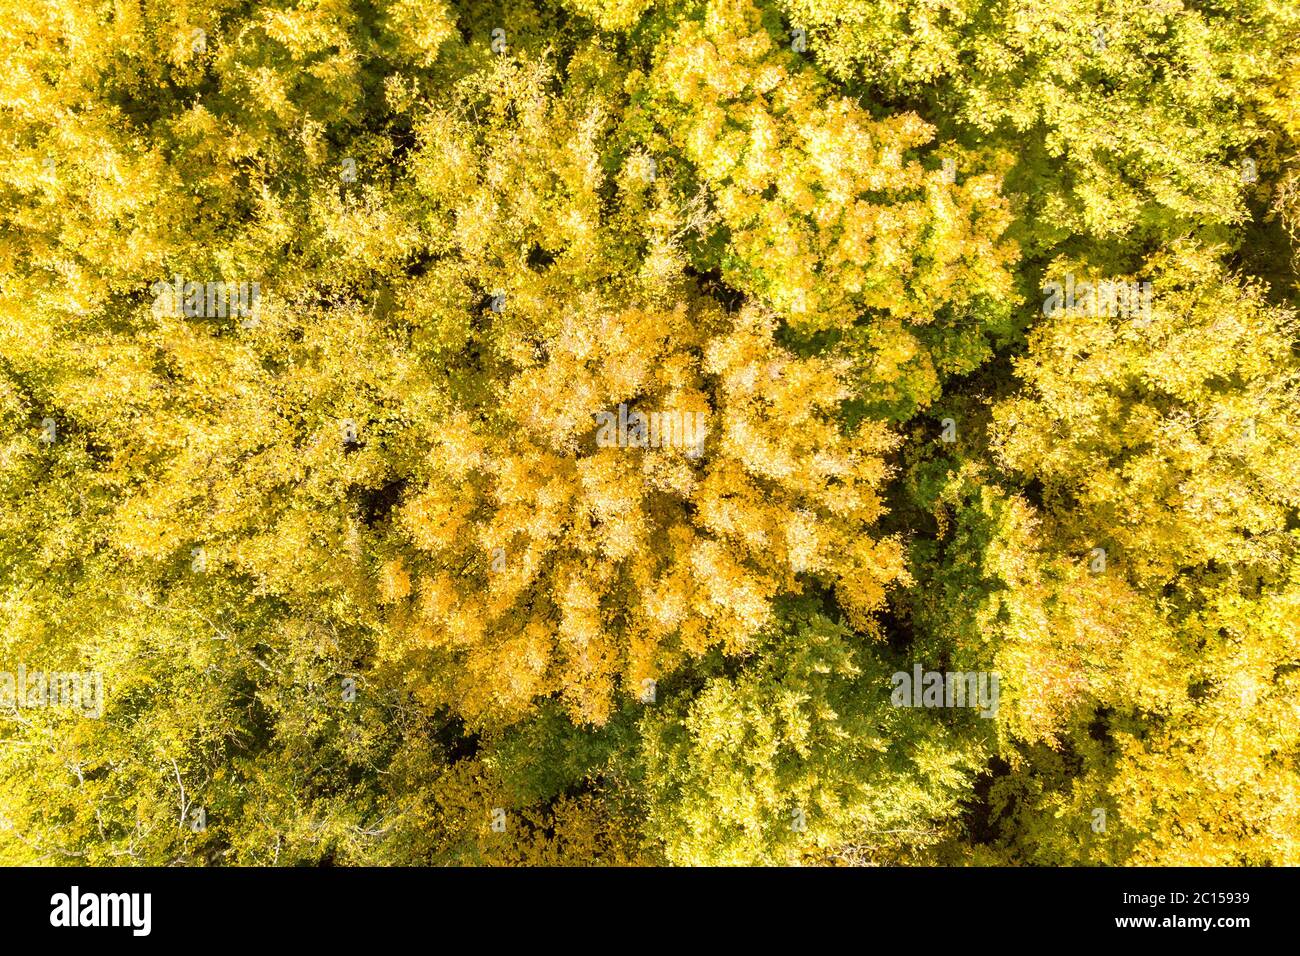 Top down aerial view of green and yellow canopies in autumn forest with many fresh trees. Stock Photo